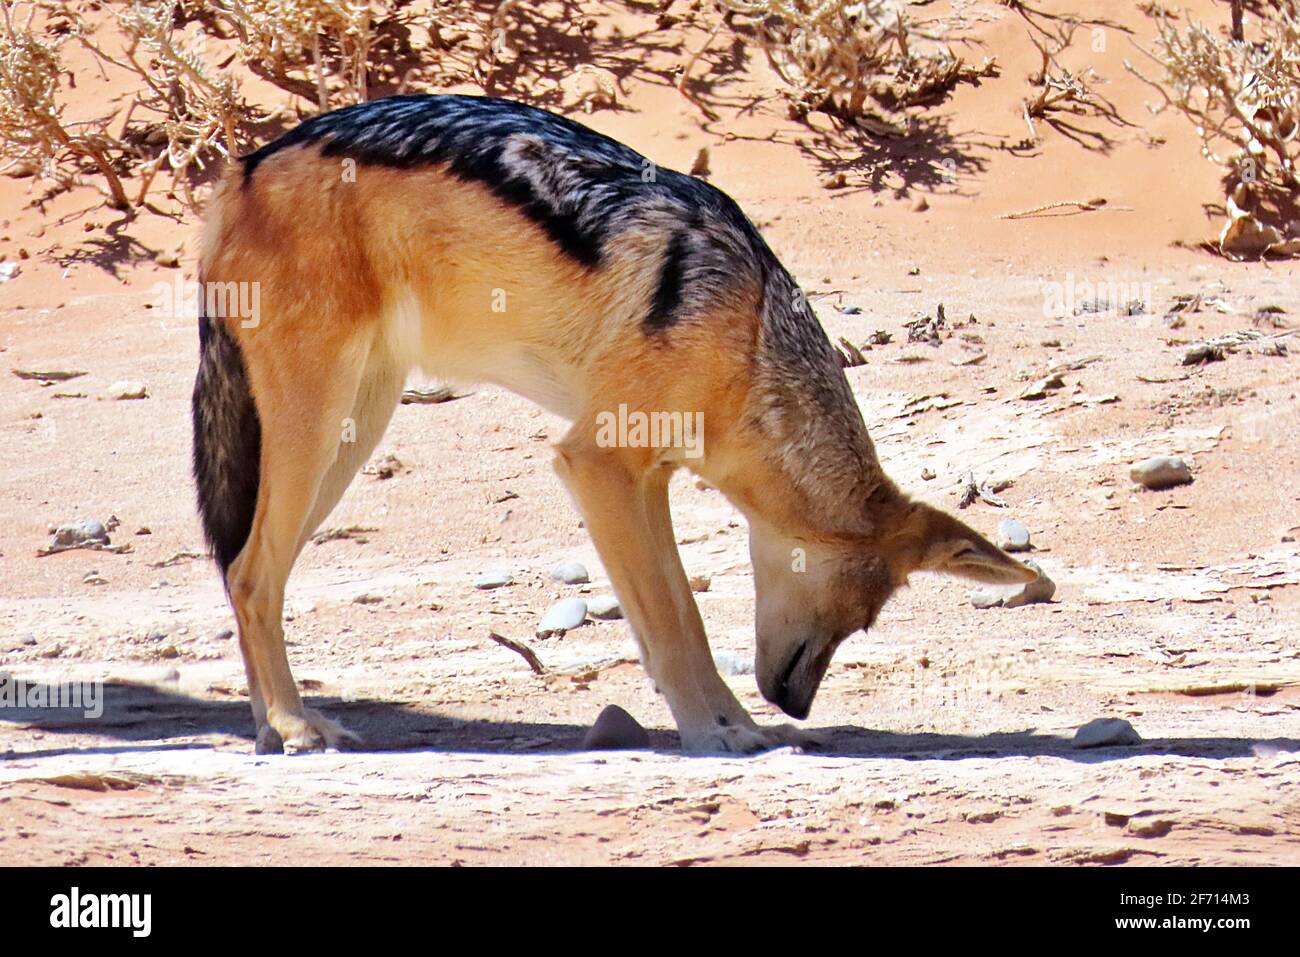 A Black Backed Jackal (Canis mesomelas) taking shade from the midday sun at Sossusvlei, Namibia Stock Photo